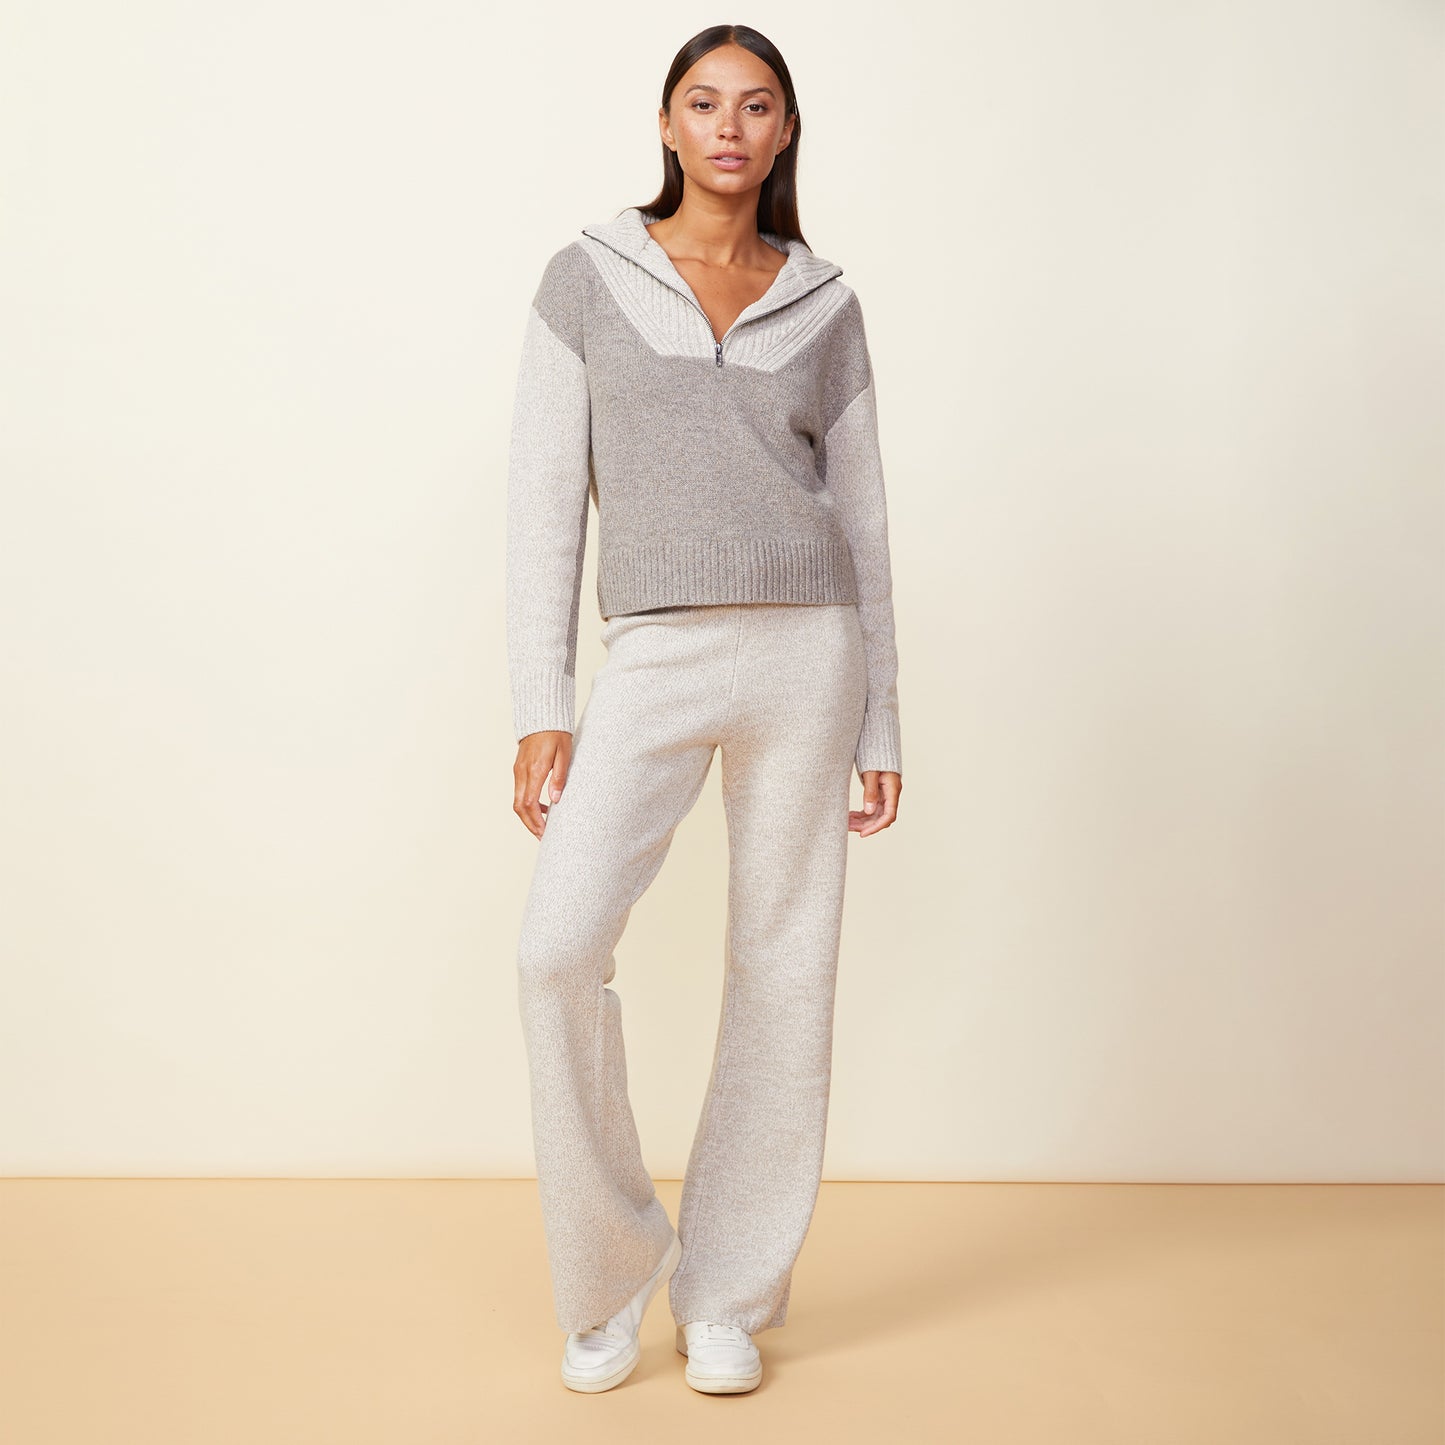 Wool Cashmere Marled Colorblock Half Zip Sweater